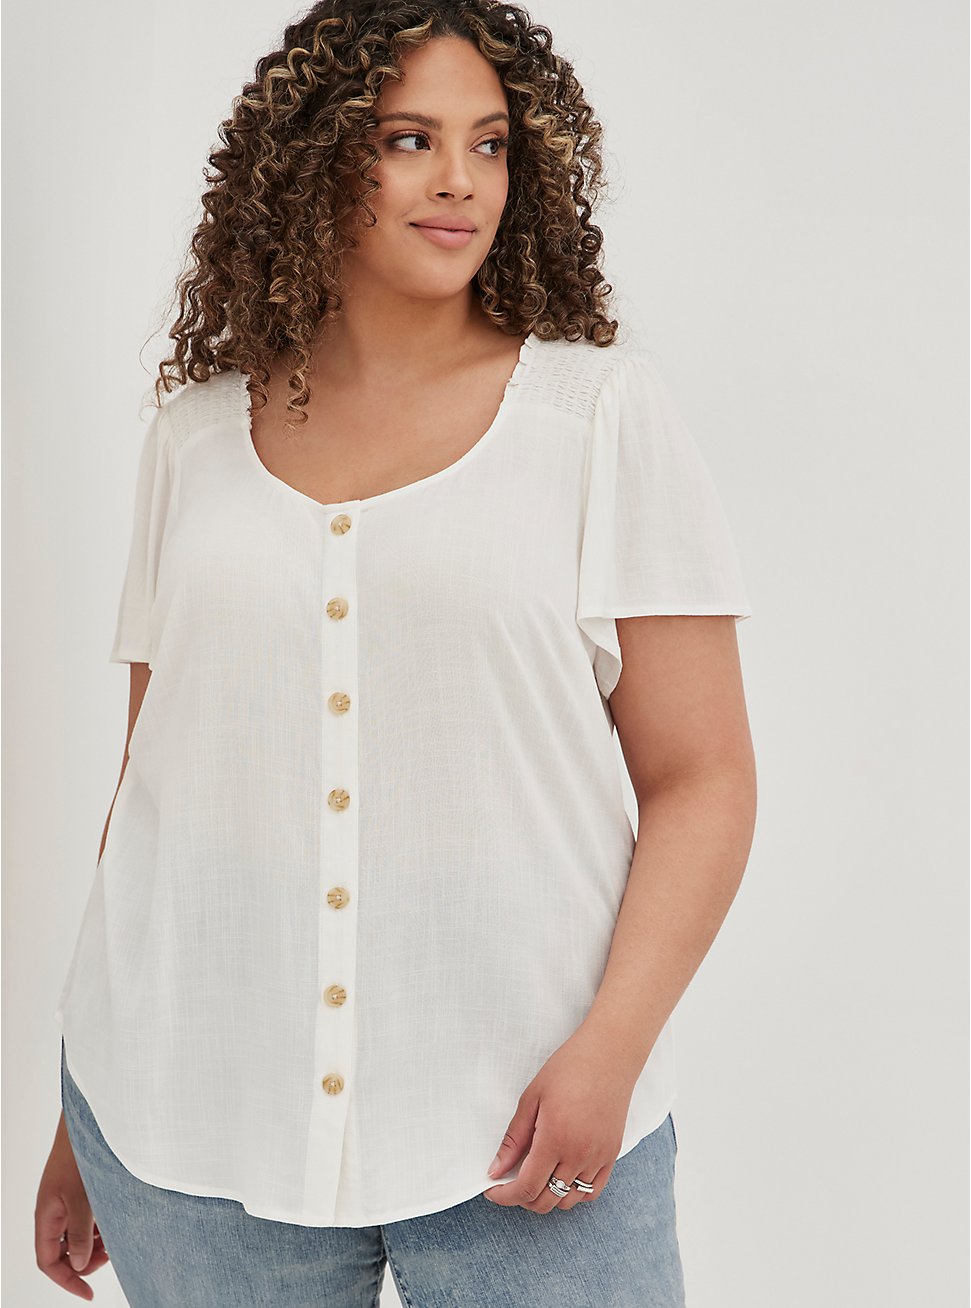 Plus Size Flutter Sleeve Blouse - Textured Stretch Rayon White	, CLOUD DANCER, hi-res